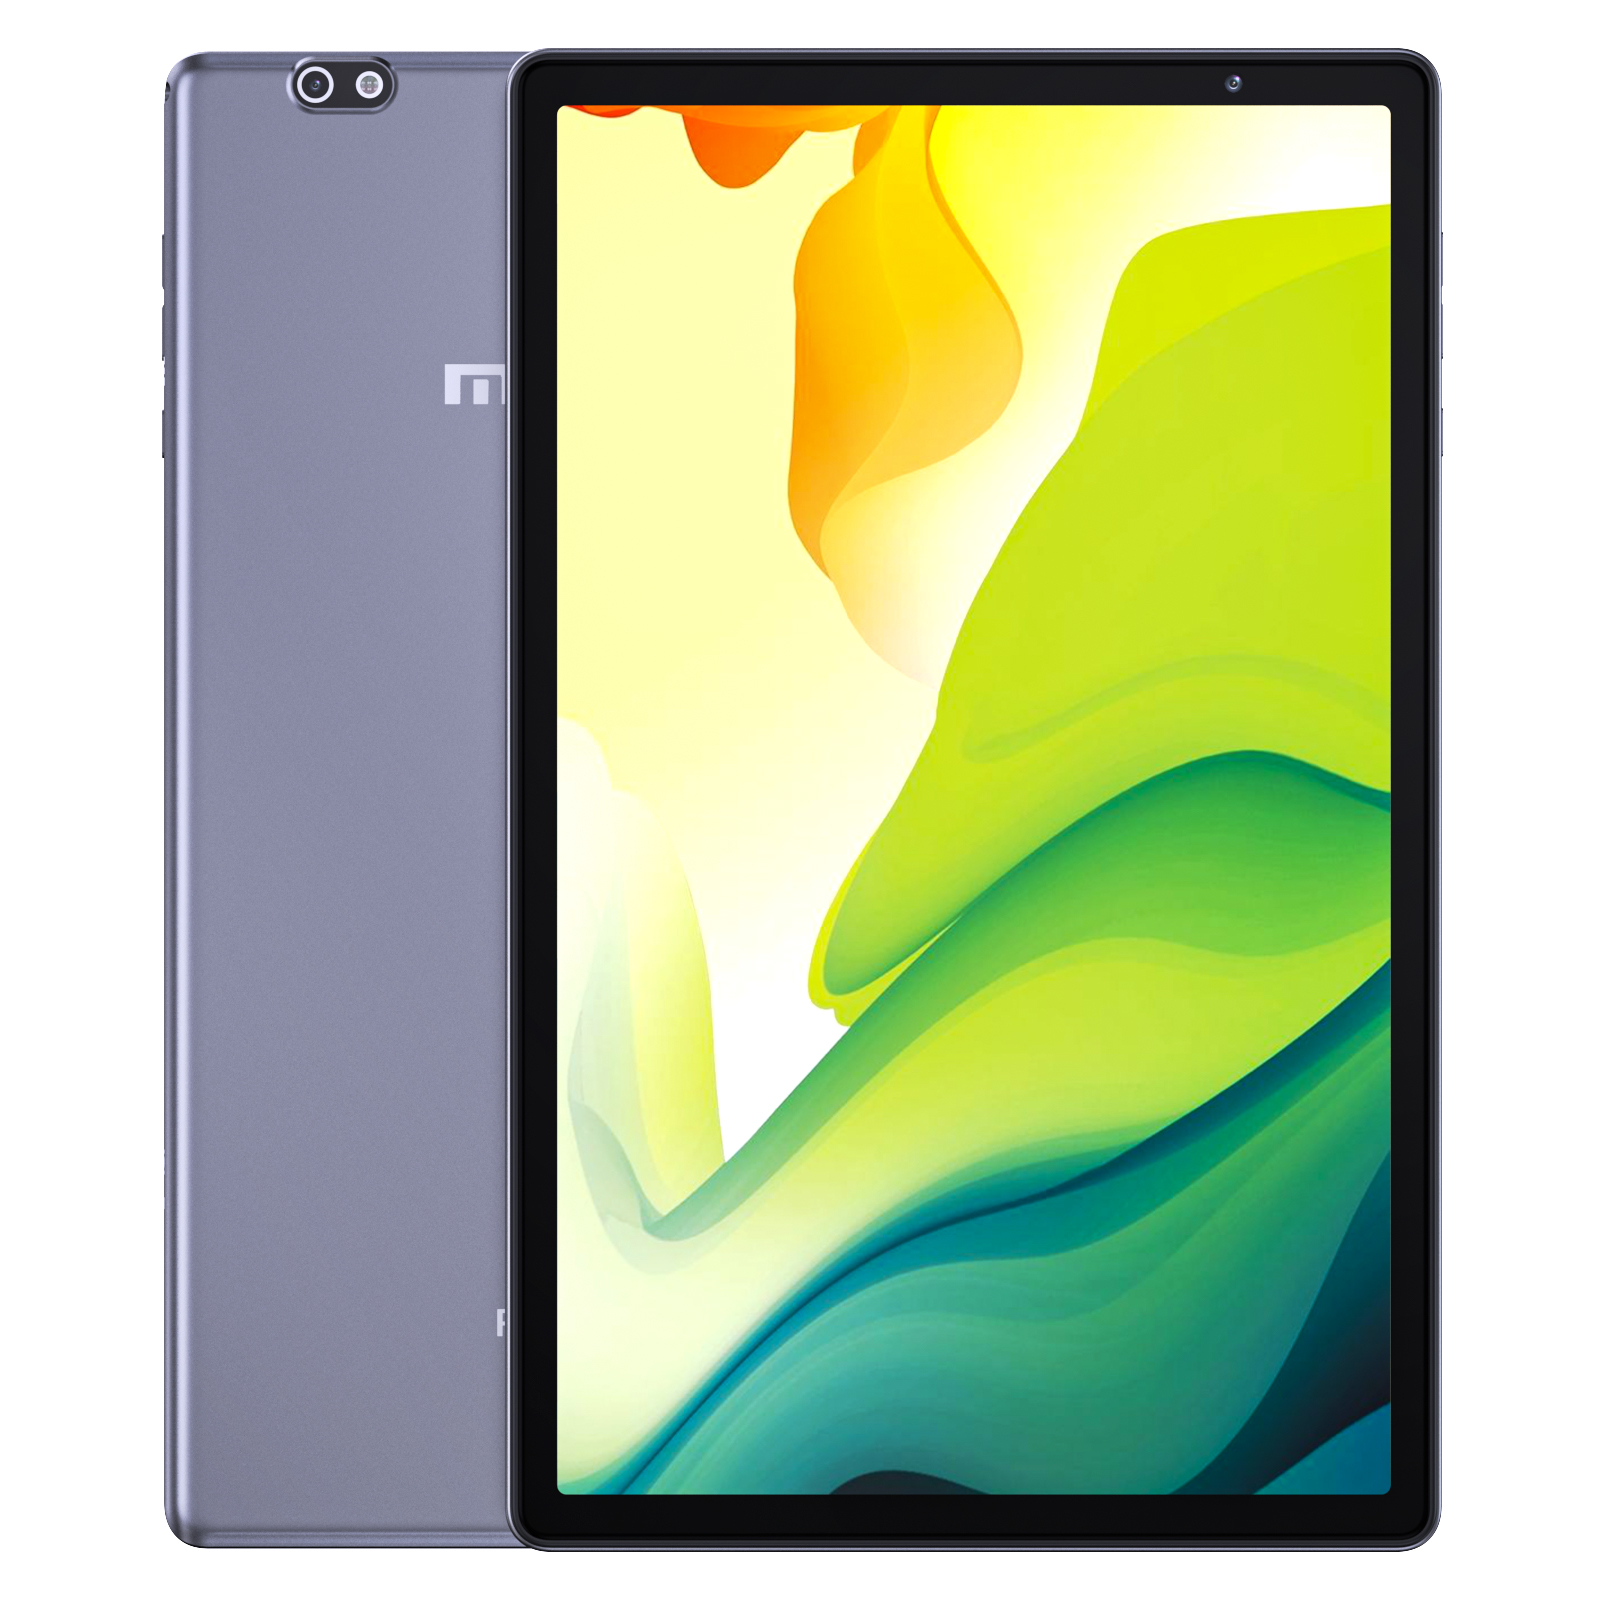 MAGCH T10 10.1 inch Tablet, Android 11.0, 3GB RAM, 32GB ROM, Quad-Core Processor, Up to 1.8Ghz, 8MP Rear Camera, HD IPS Display, 5000mAh Battery, Wi-Fi, Bluetooth 4.2, Metal Body, Grey